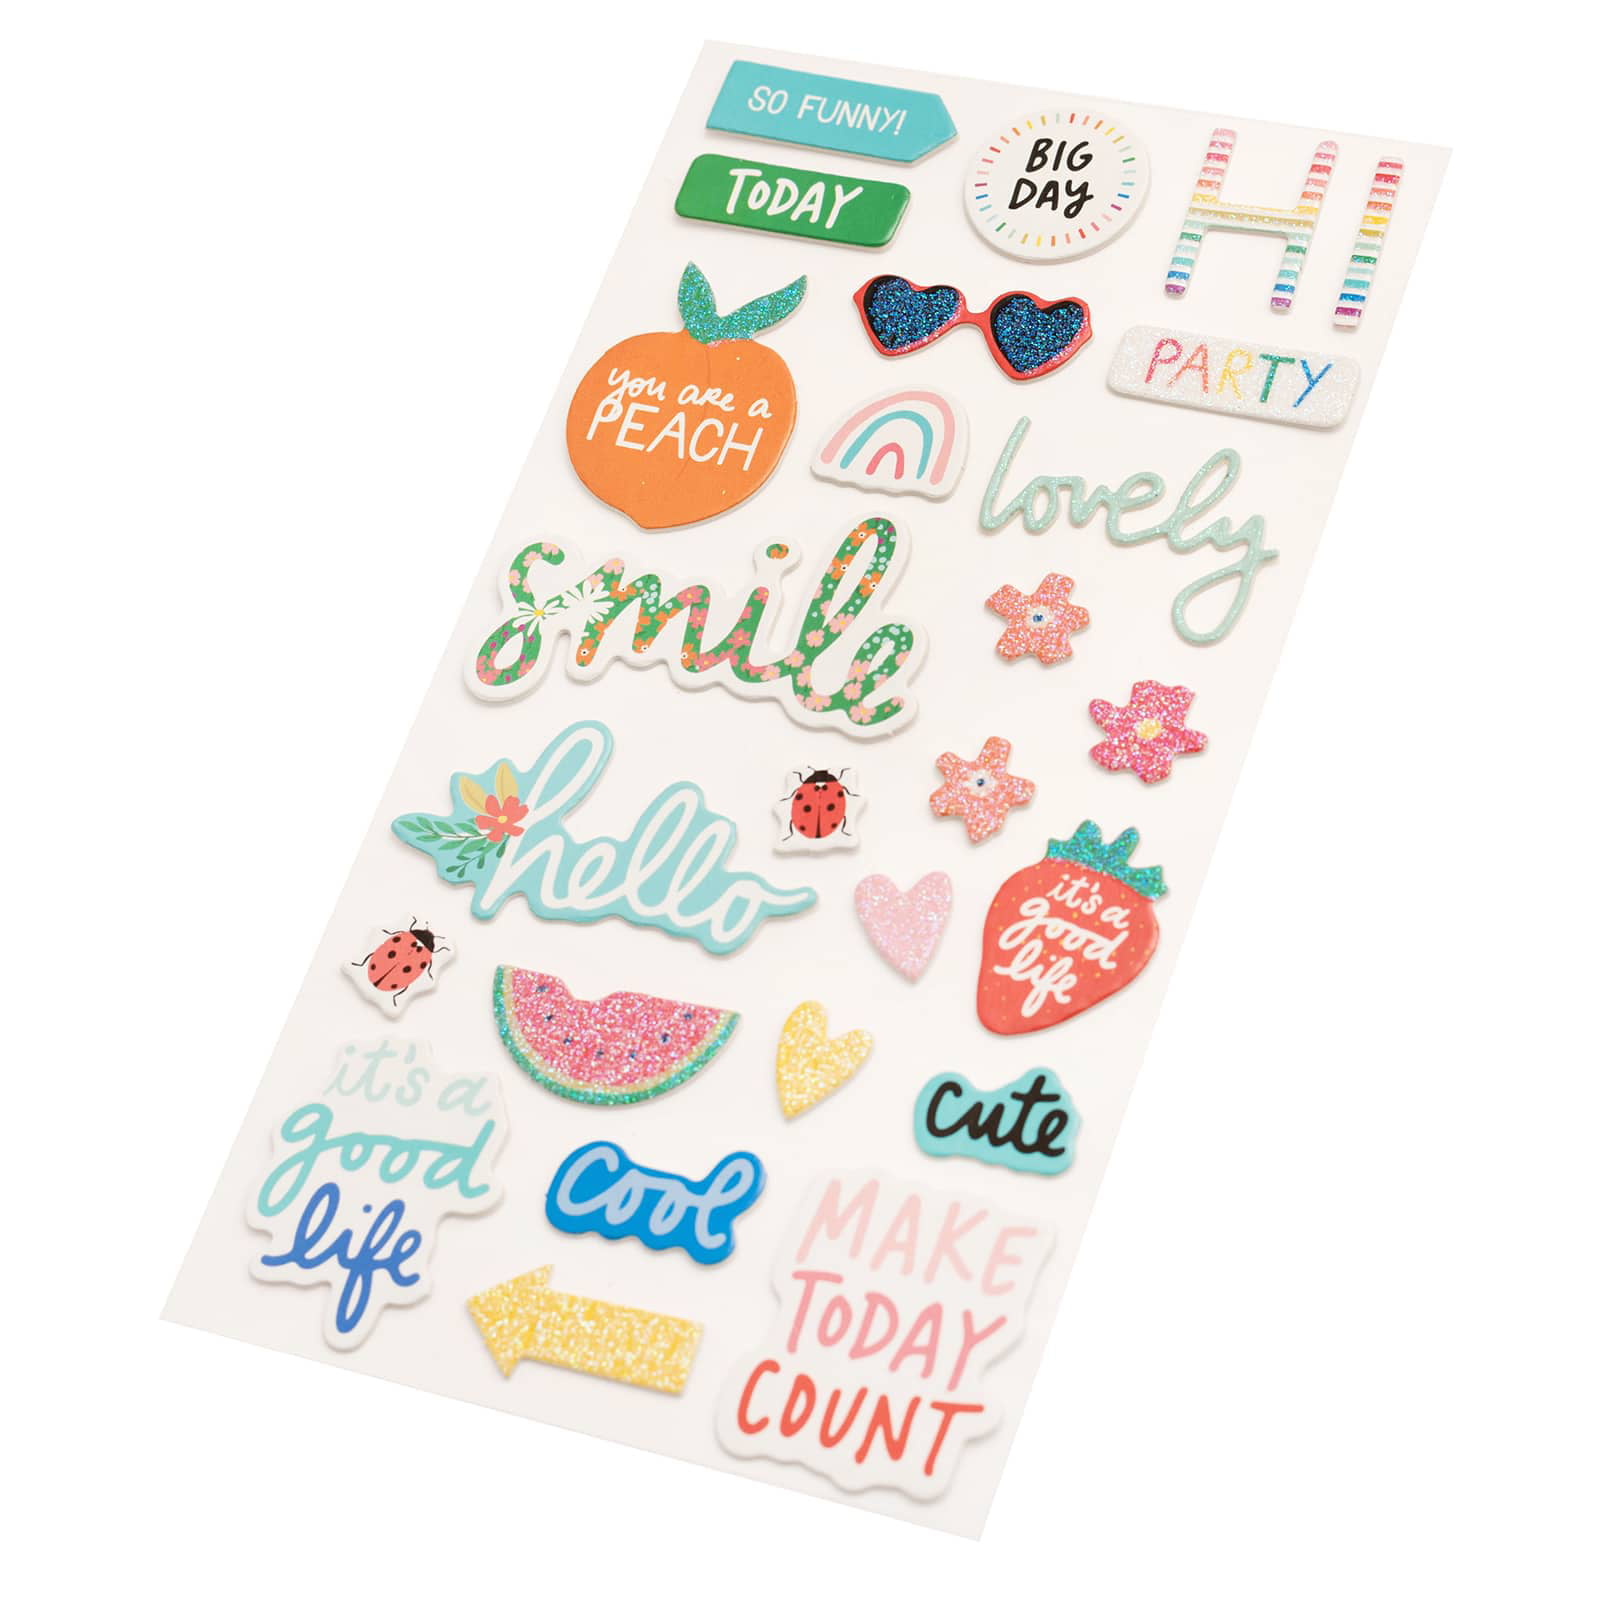 Teacher Stickers by Recollections™